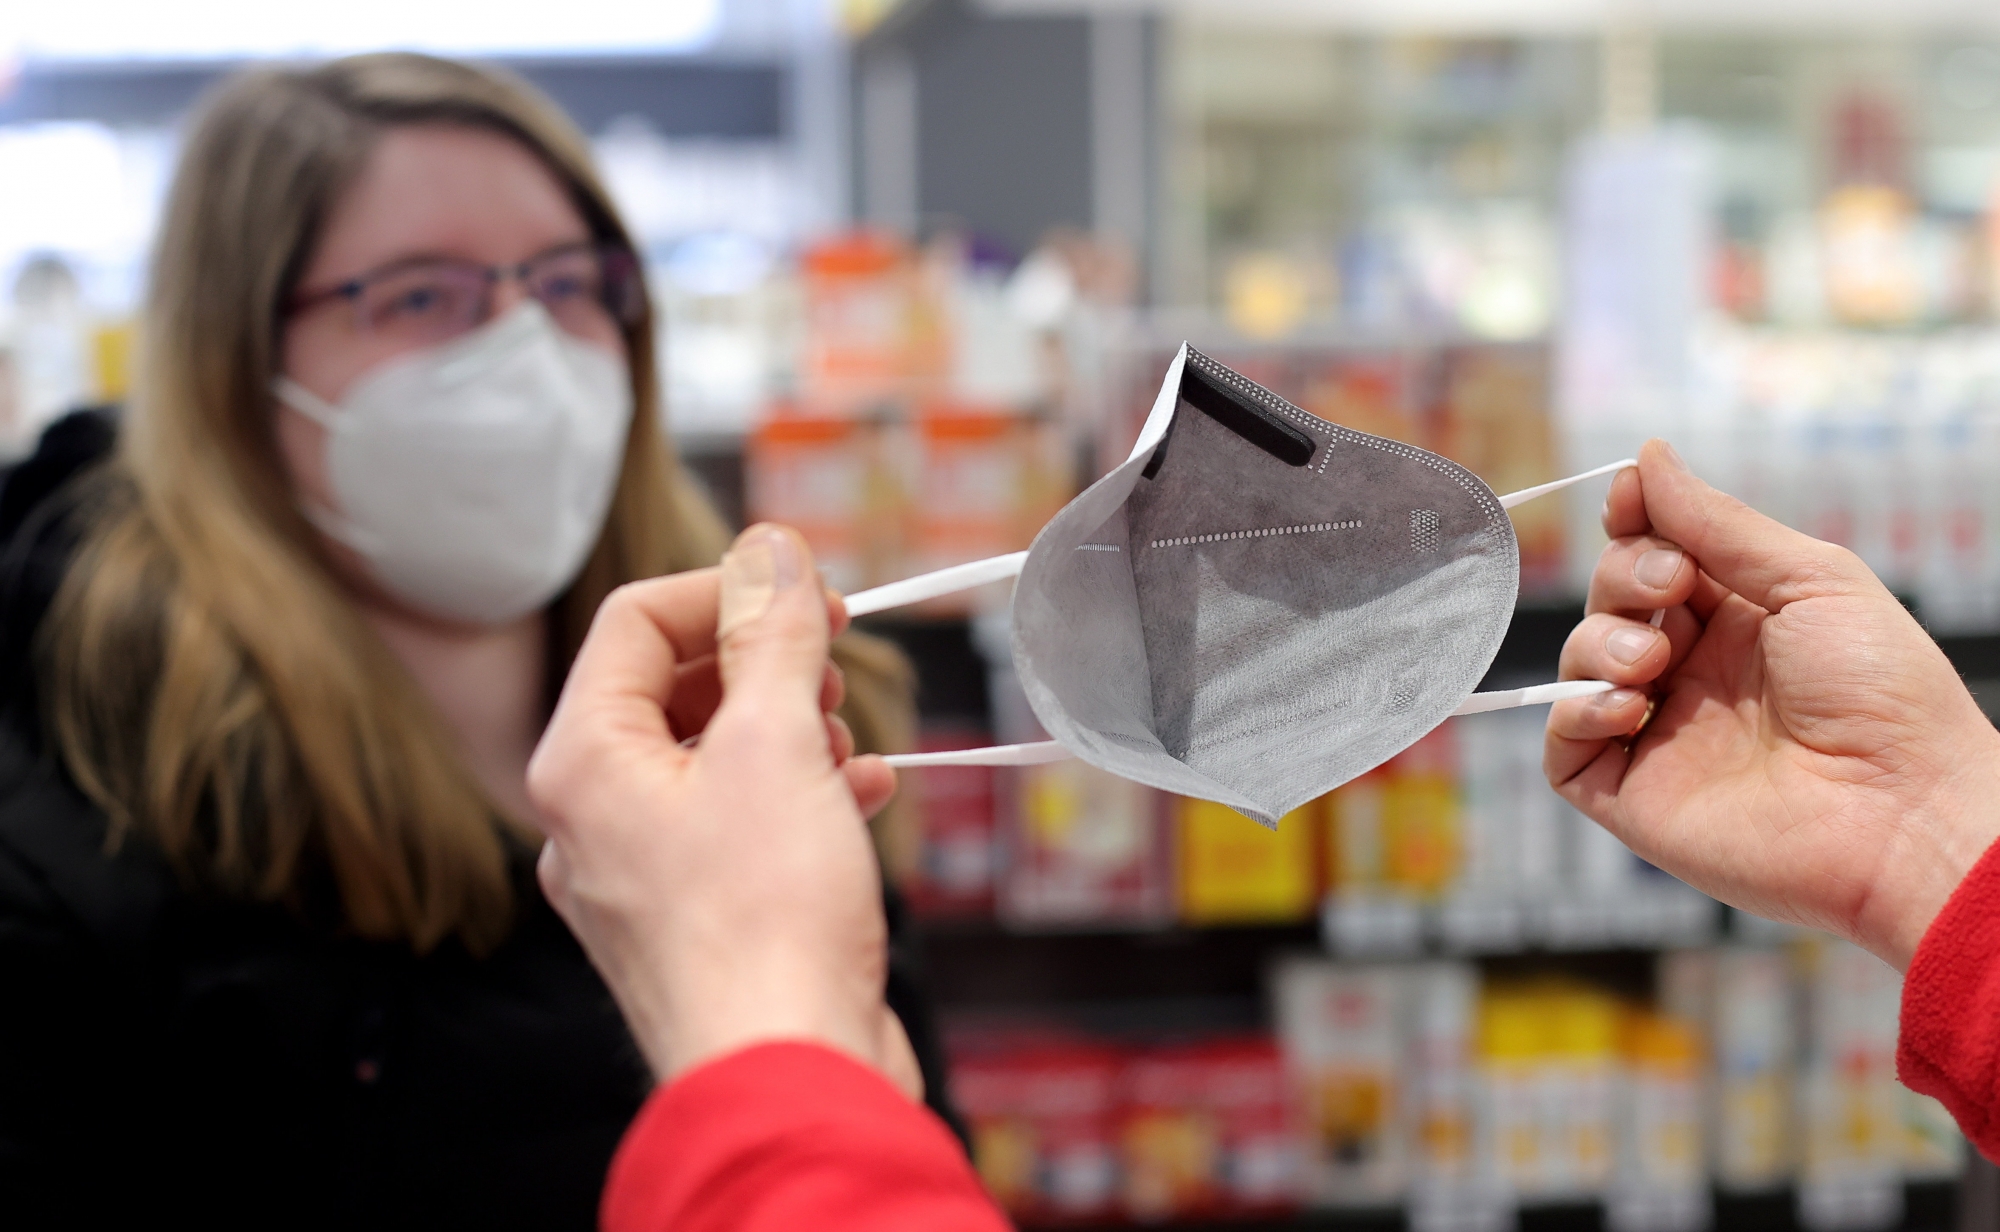 epa08958384 Pharmacist Stephan Neuhaus demonstrates the usage of a FFP2 protective mouth-nose mask with grey fleece to a customer at the Baeren pharmacy in Dortmund, Germany, 22 January 2021. In Germany, medical face masks will in future have to be worn on public transport, when shopping and even at religious services. To protect themselves more effectively, surgical masks or mouth-nose protection with the standards KN95/N95 or FFP2 will be required. People over 60 and people with certain chronic diseases will receive two vouchers for six FFP2 masks each from their health insurers and can redeem them at the pharmacy for a fee of two euros each.  EPA/FRIEDEMANN VOGEL